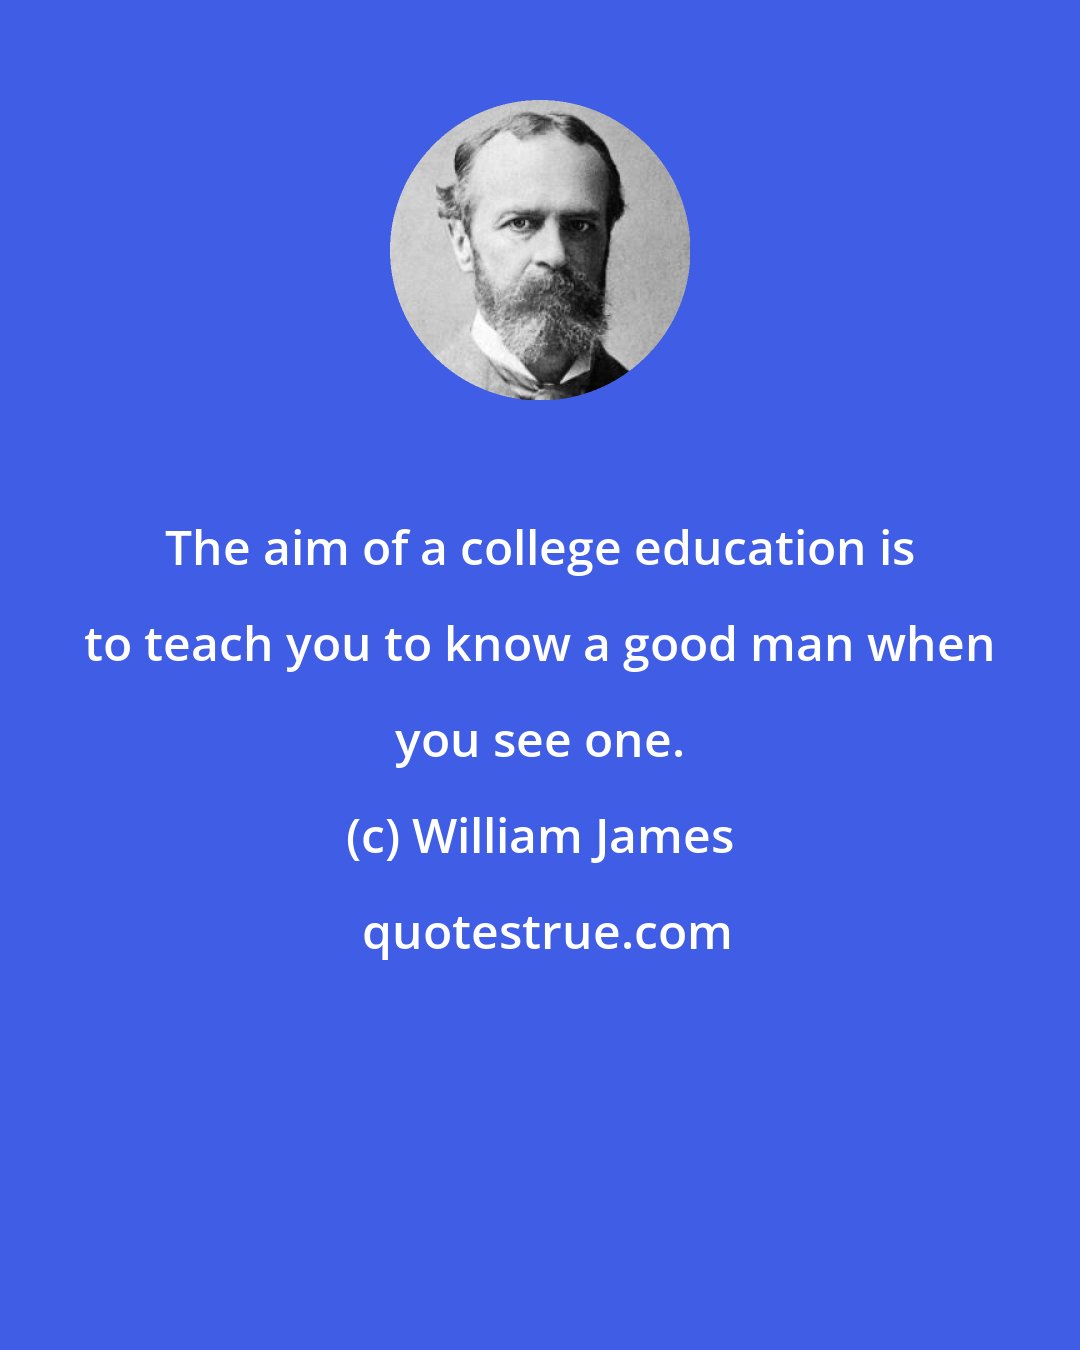 William James: The aim of a college education is to teach you to know a good man when you see one.